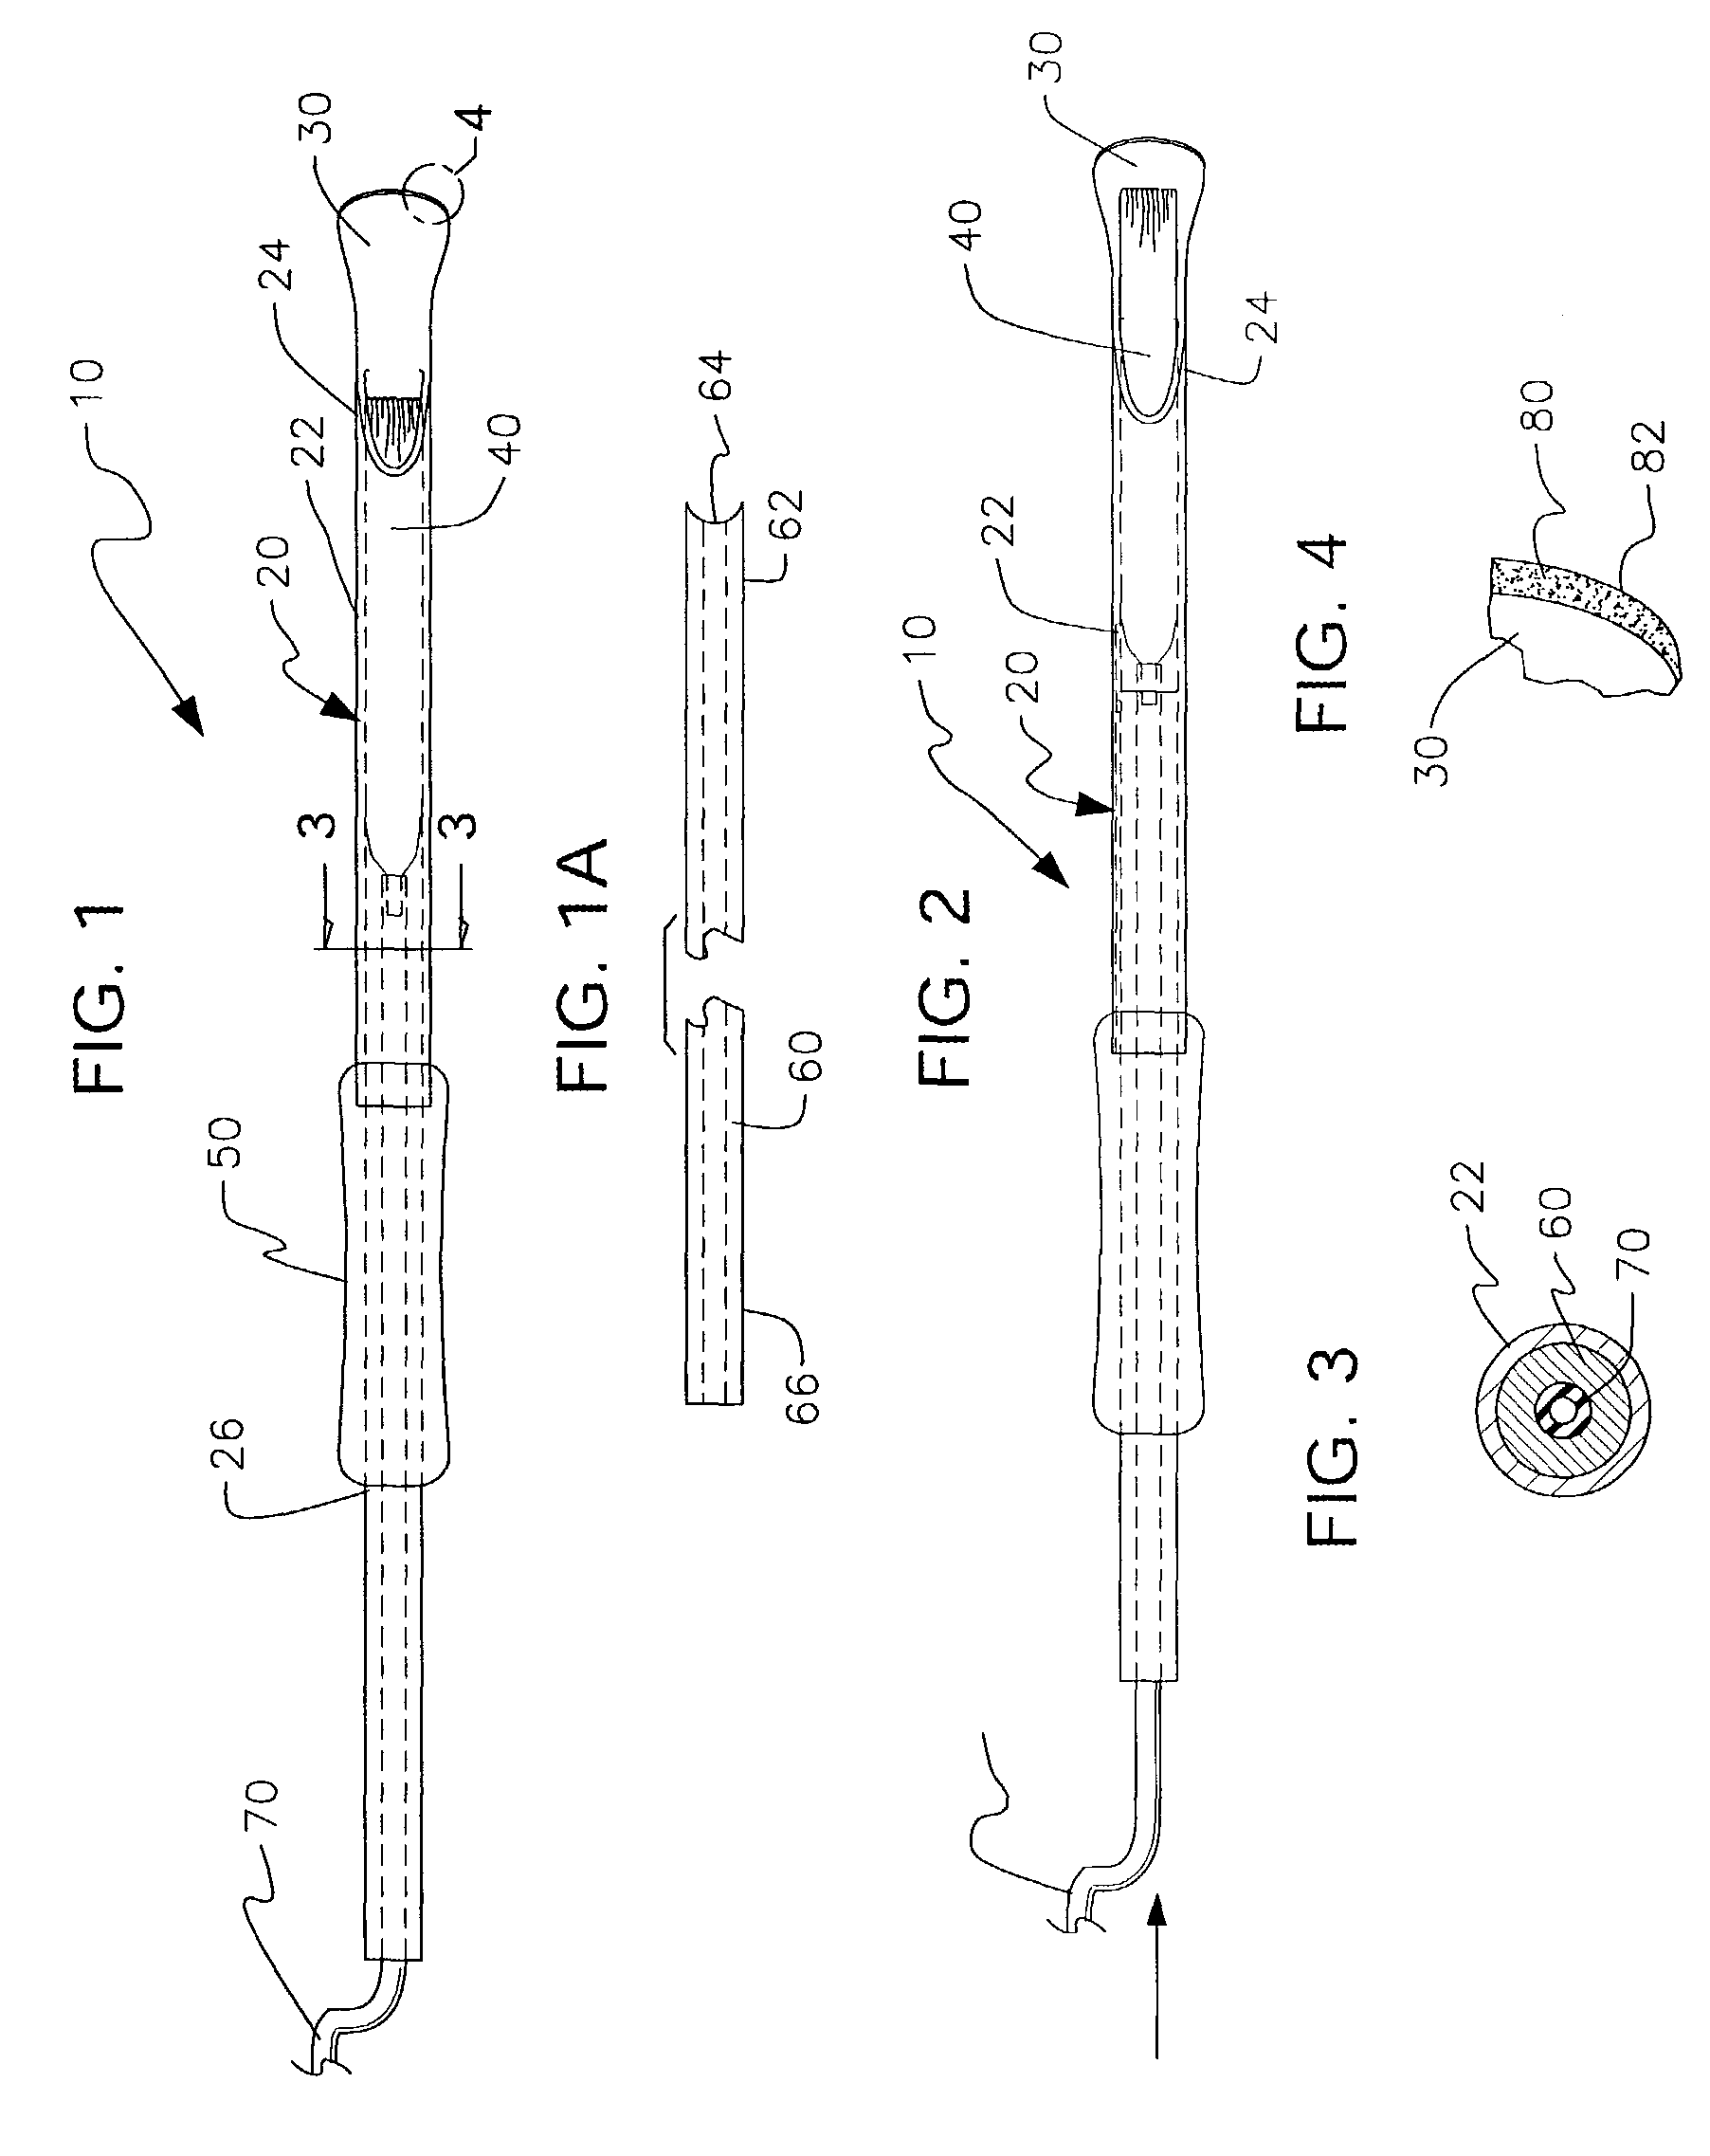 Apparatus for use in fascial cleft surgery for opening an anatomic space